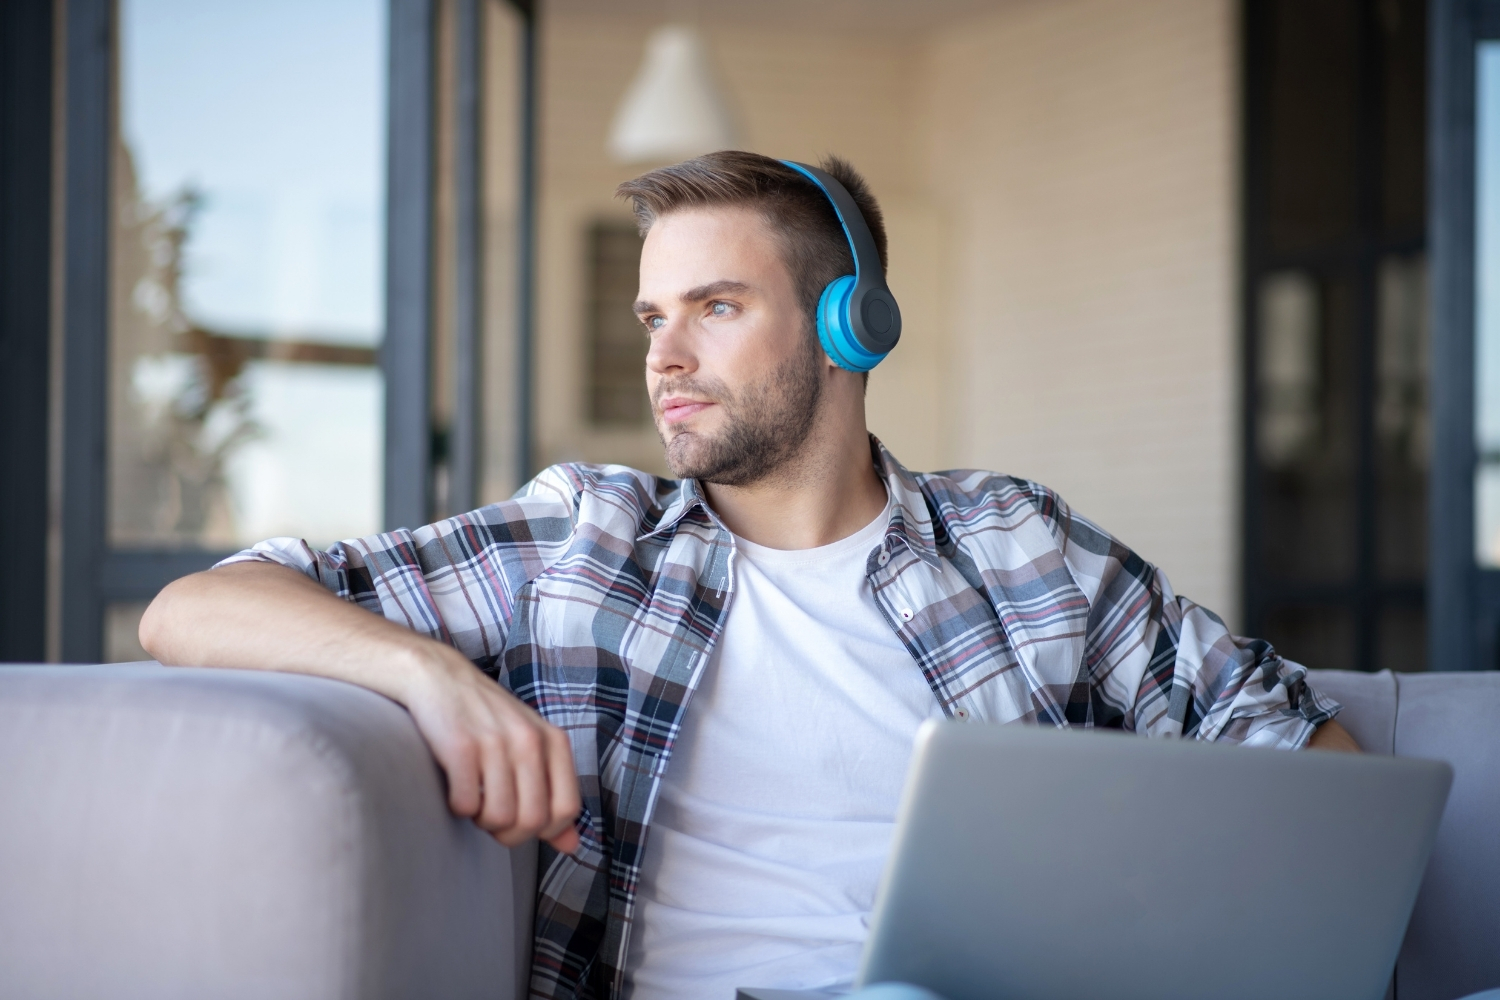 5 Finance Podcasts You’ll Want to Tune Into